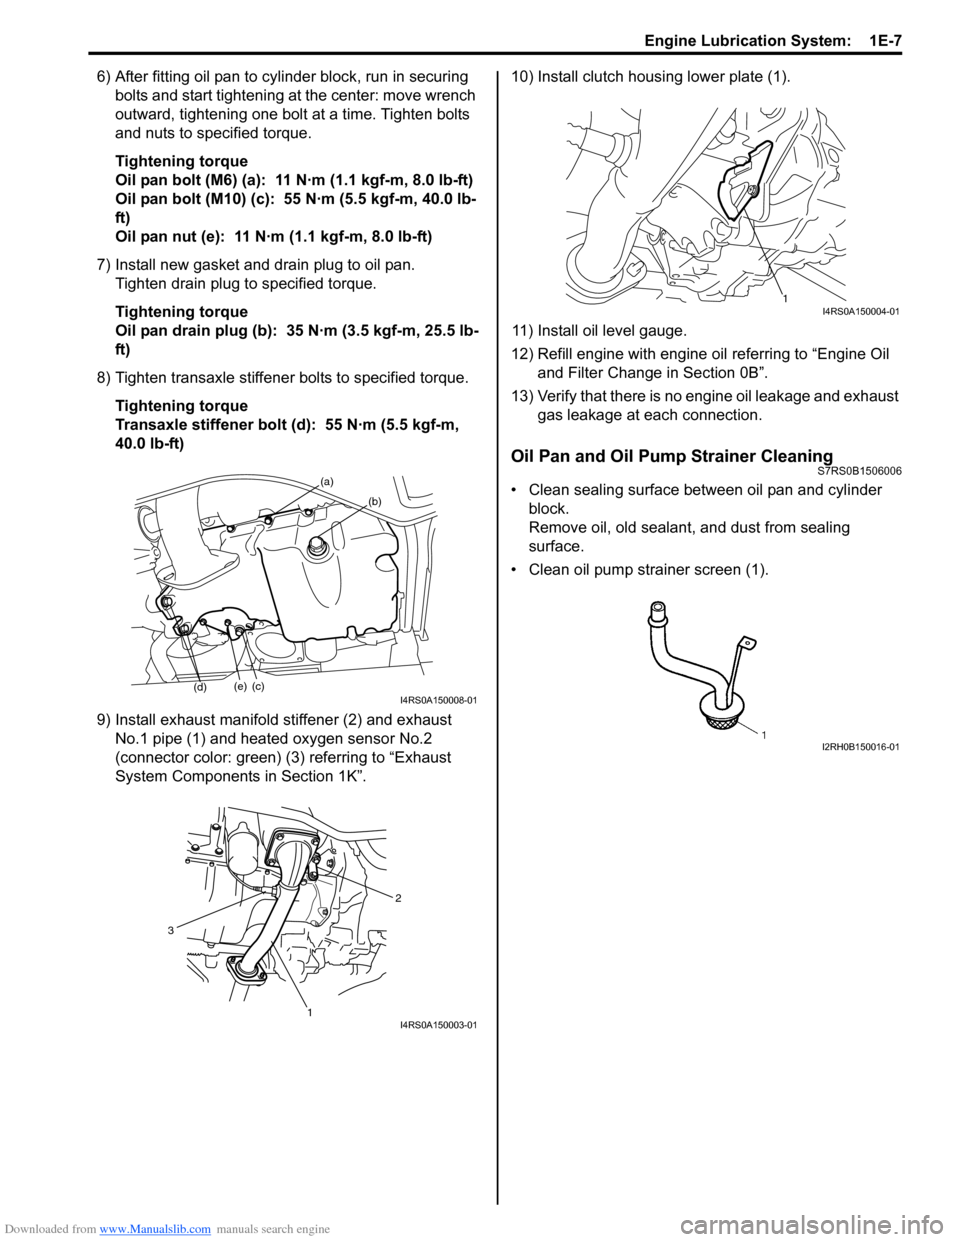 SUZUKI SWIFT 2005 2.G Service Workshop Manual Downloaded from www.Manualslib.com manuals search engine Engine Lubrication System:  1E-7
6) After fitting oil pan to cylinder block, run in securing bolts and start tightening at the center: move wre